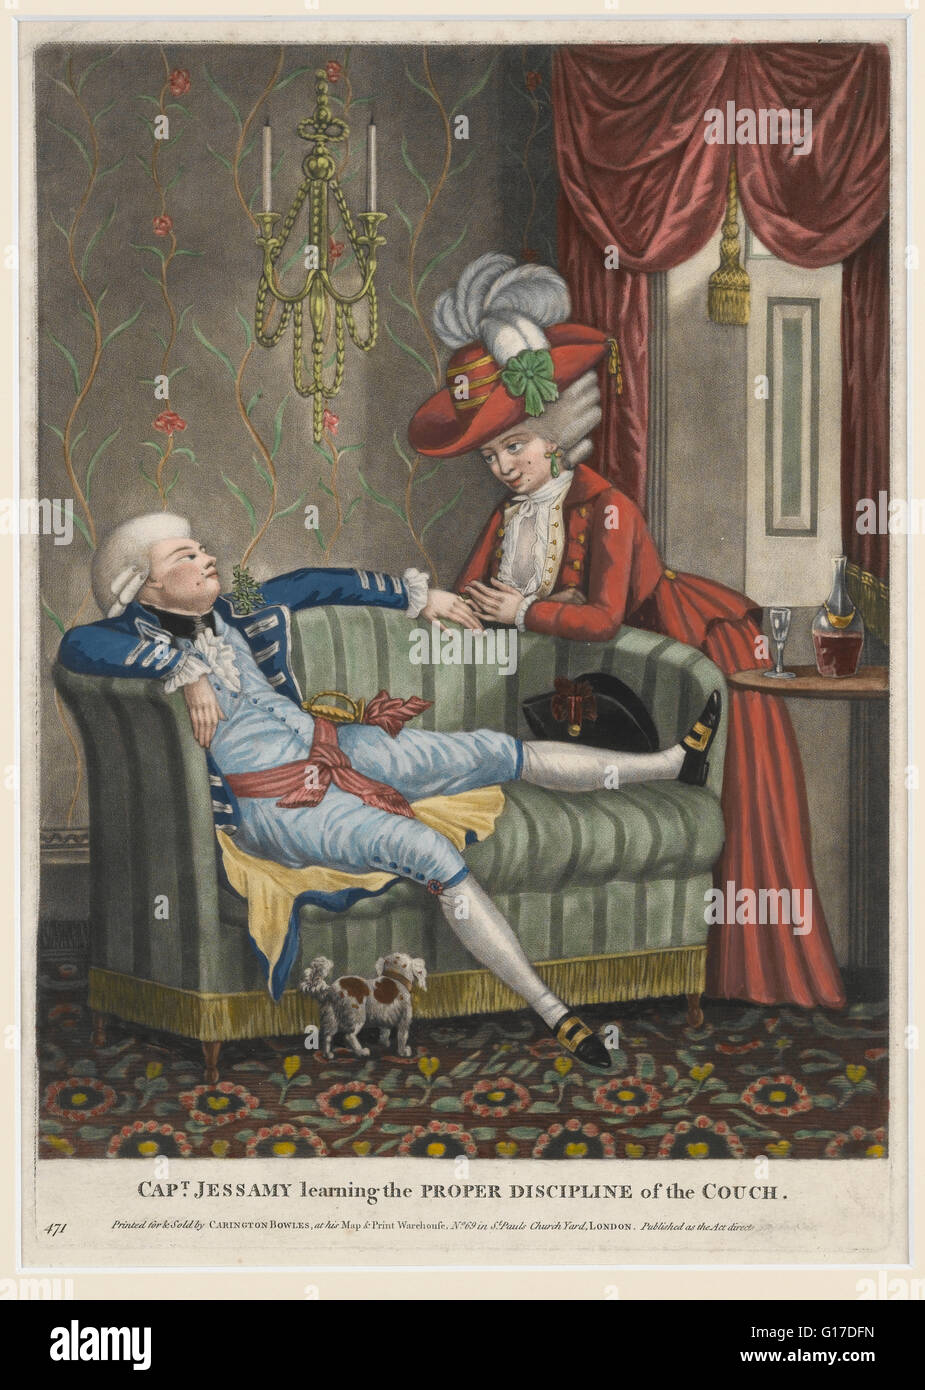 Mezzotint on laid paper entitled, 'CAPT JESSAMY learning the PROPER DISCIPLINE OF THE COUCH', hand-coloured with watercolour and Stock Photo